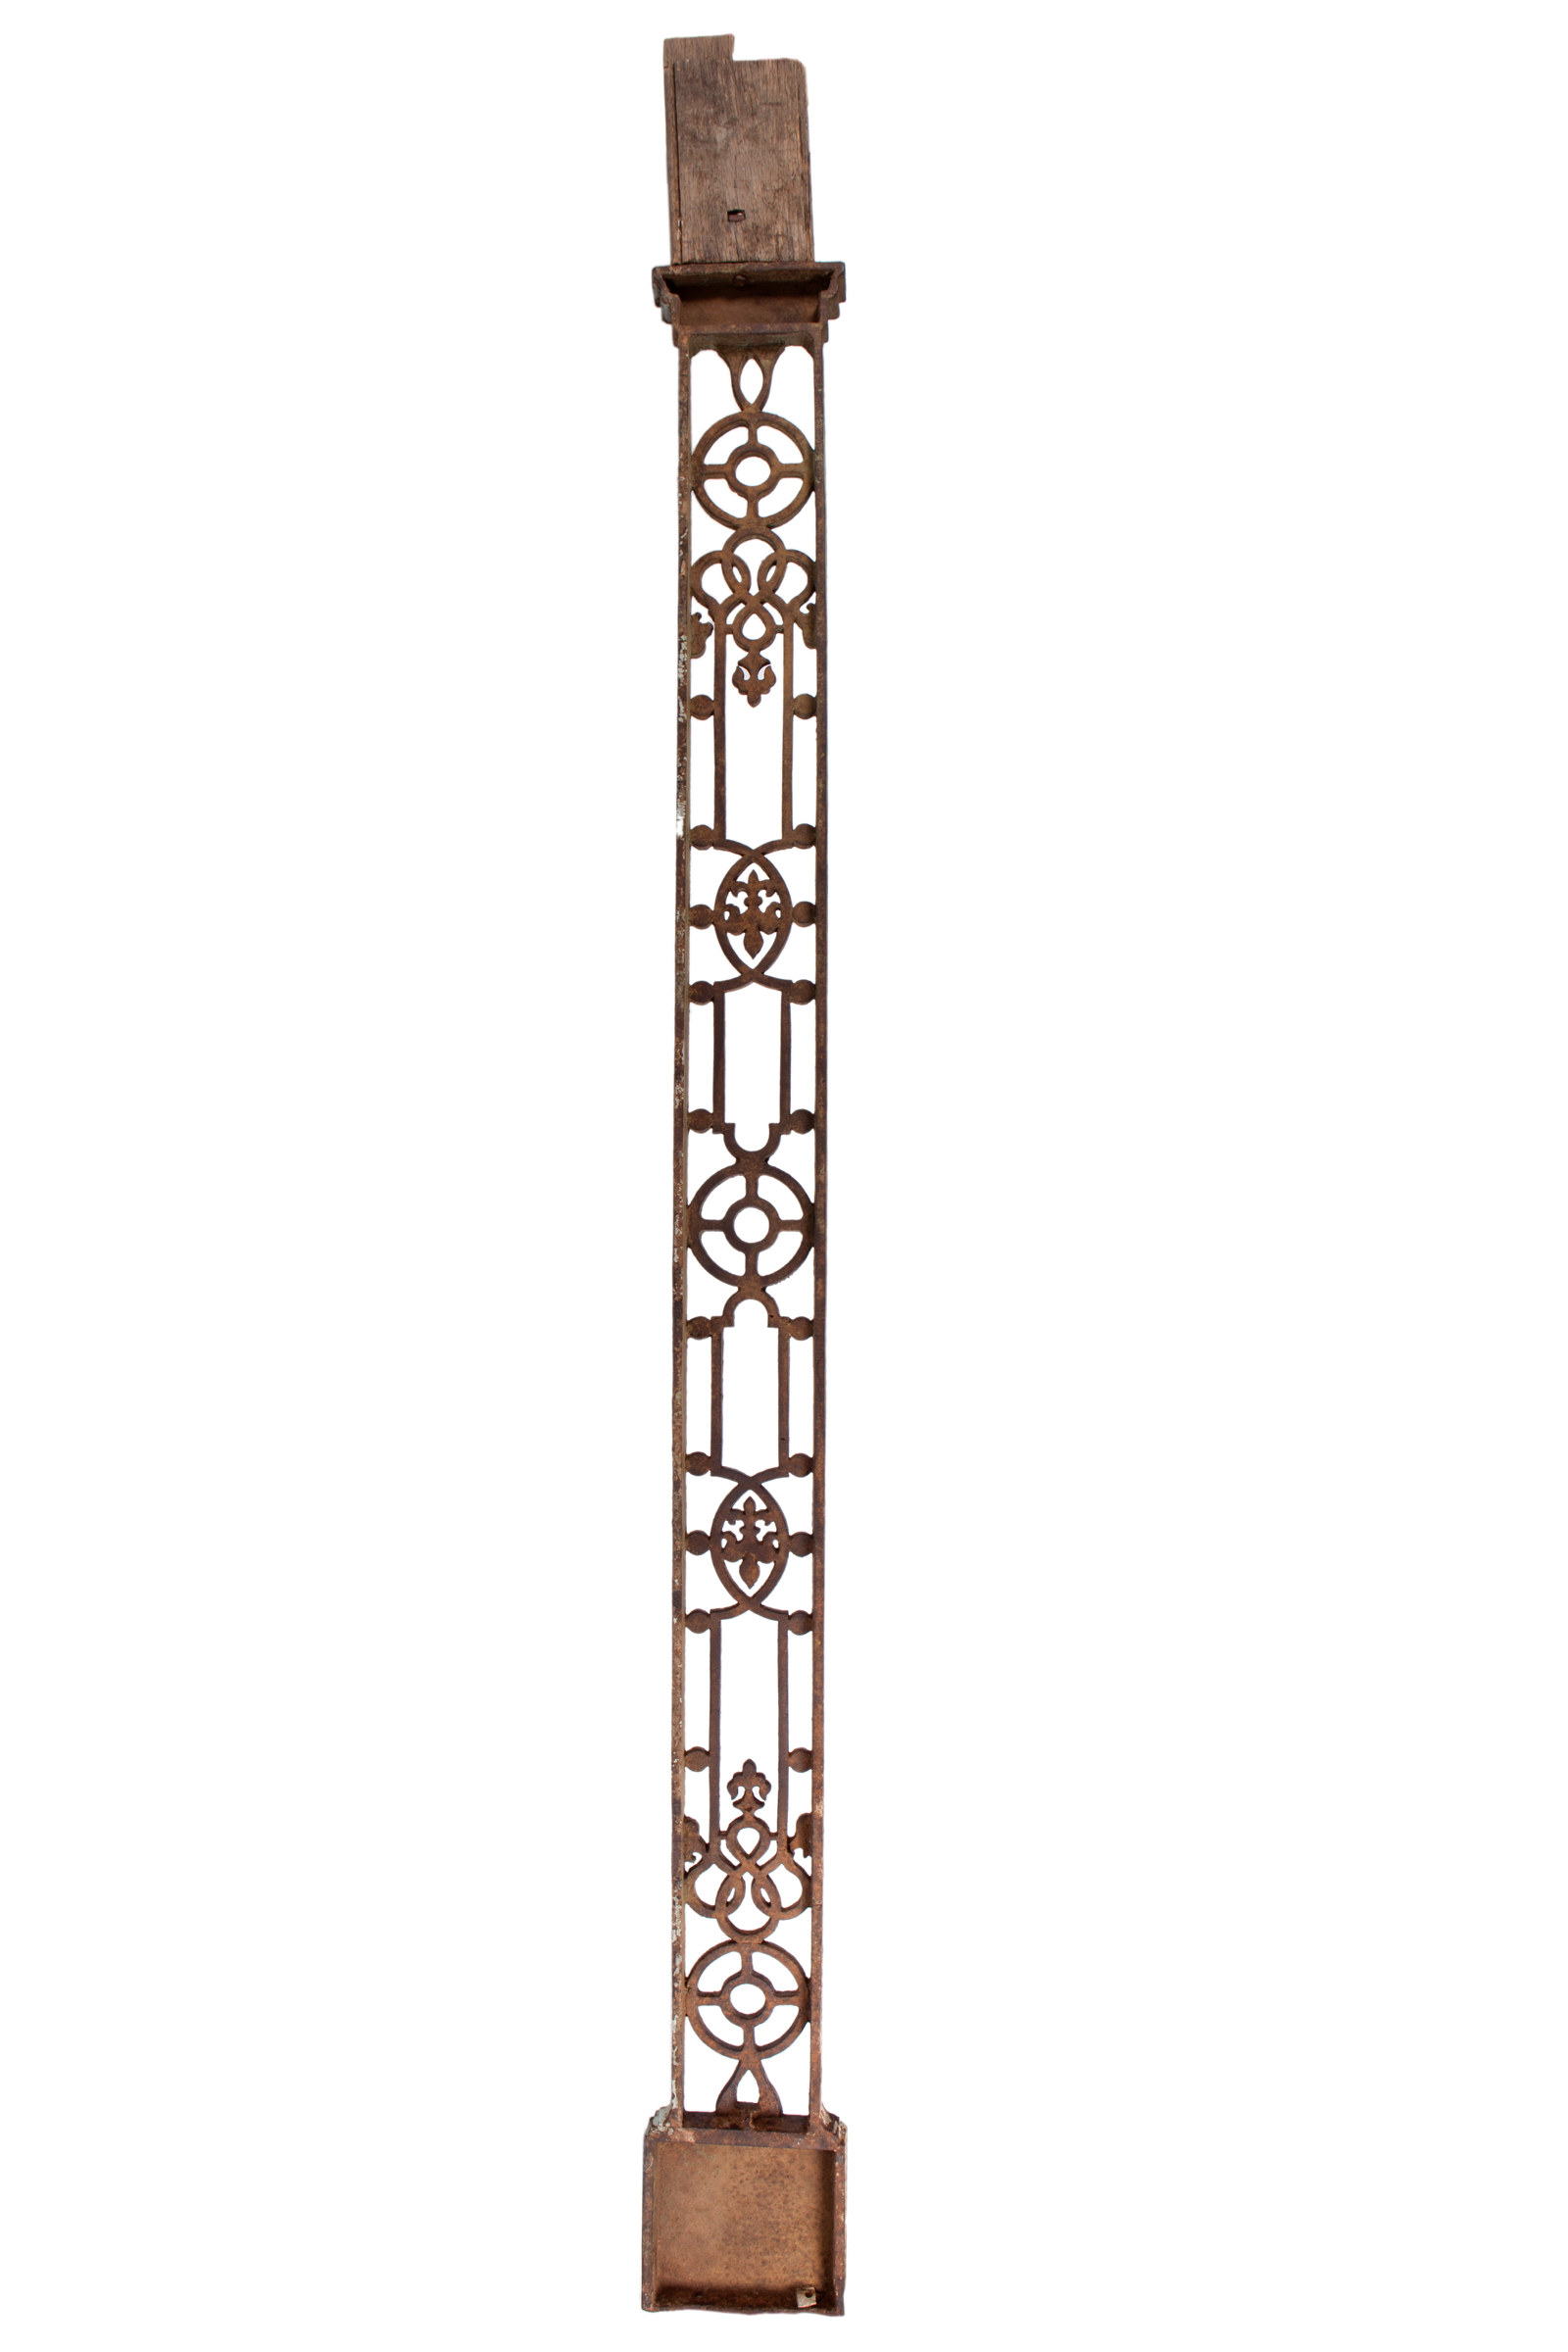 Cast iron filigree, flat grille column, 1850s-60s, from Subiaco, Rydalmere